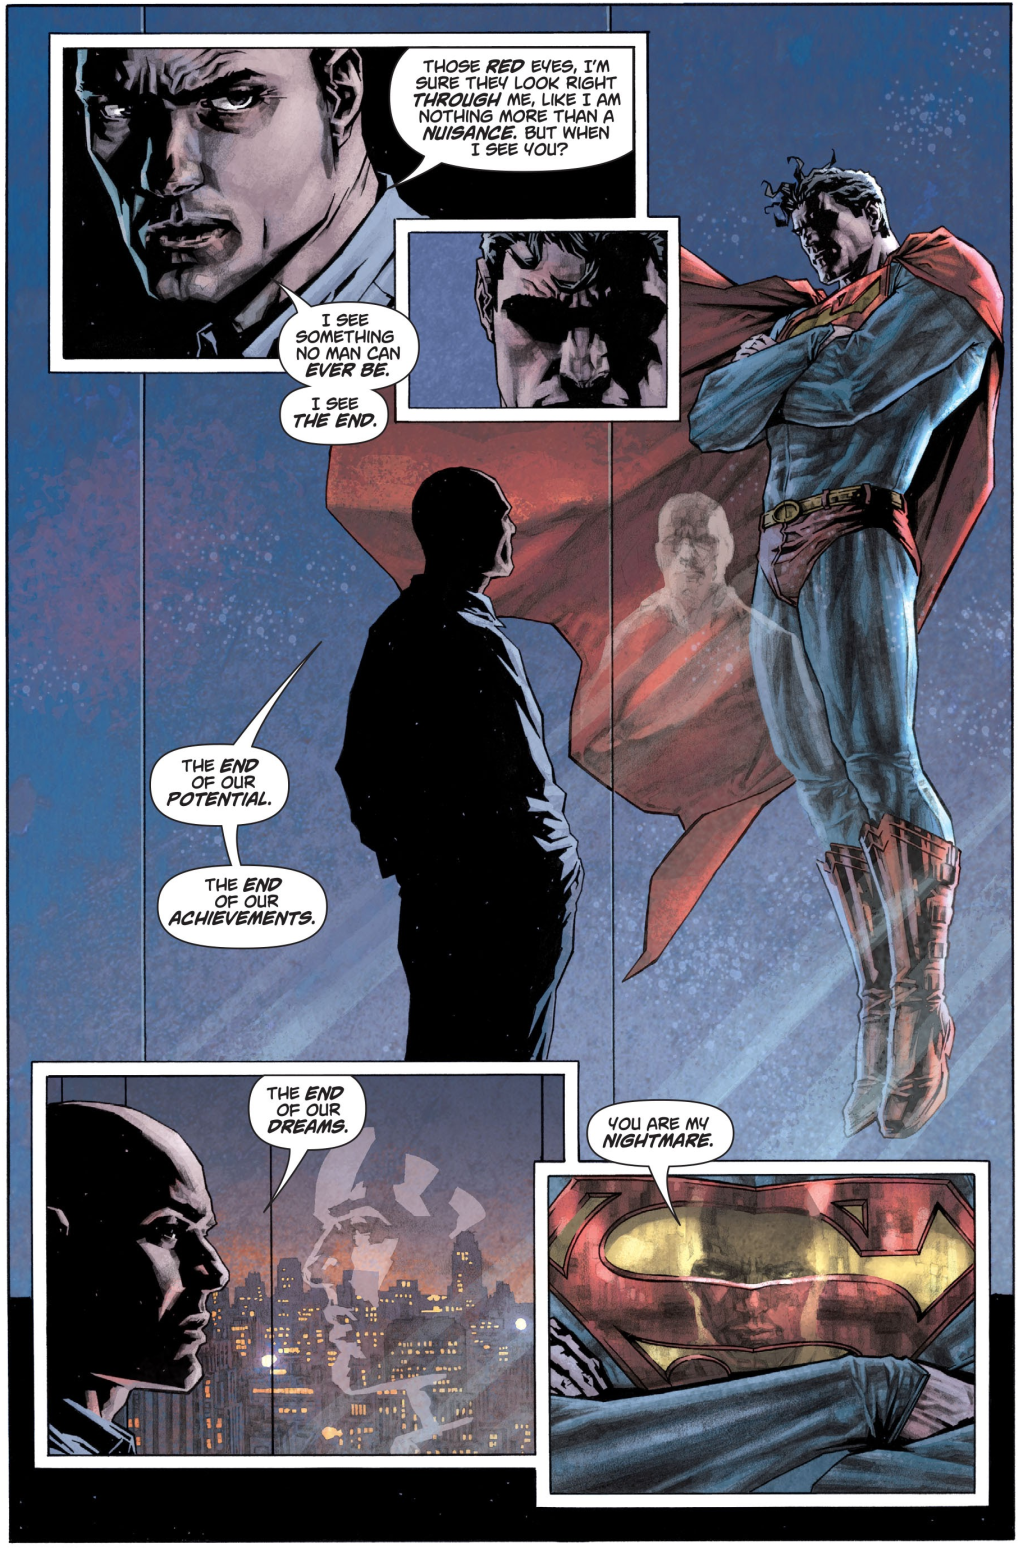 Lex Luthor reiterates his disdain for Superman's alien origin in Lex Luthor: Man of Steel Vol. 1 #1 (2005), DC. Words by Brian Azzarello, art by Lee Bermejo, Dave Stewart, and Rob Leigh.